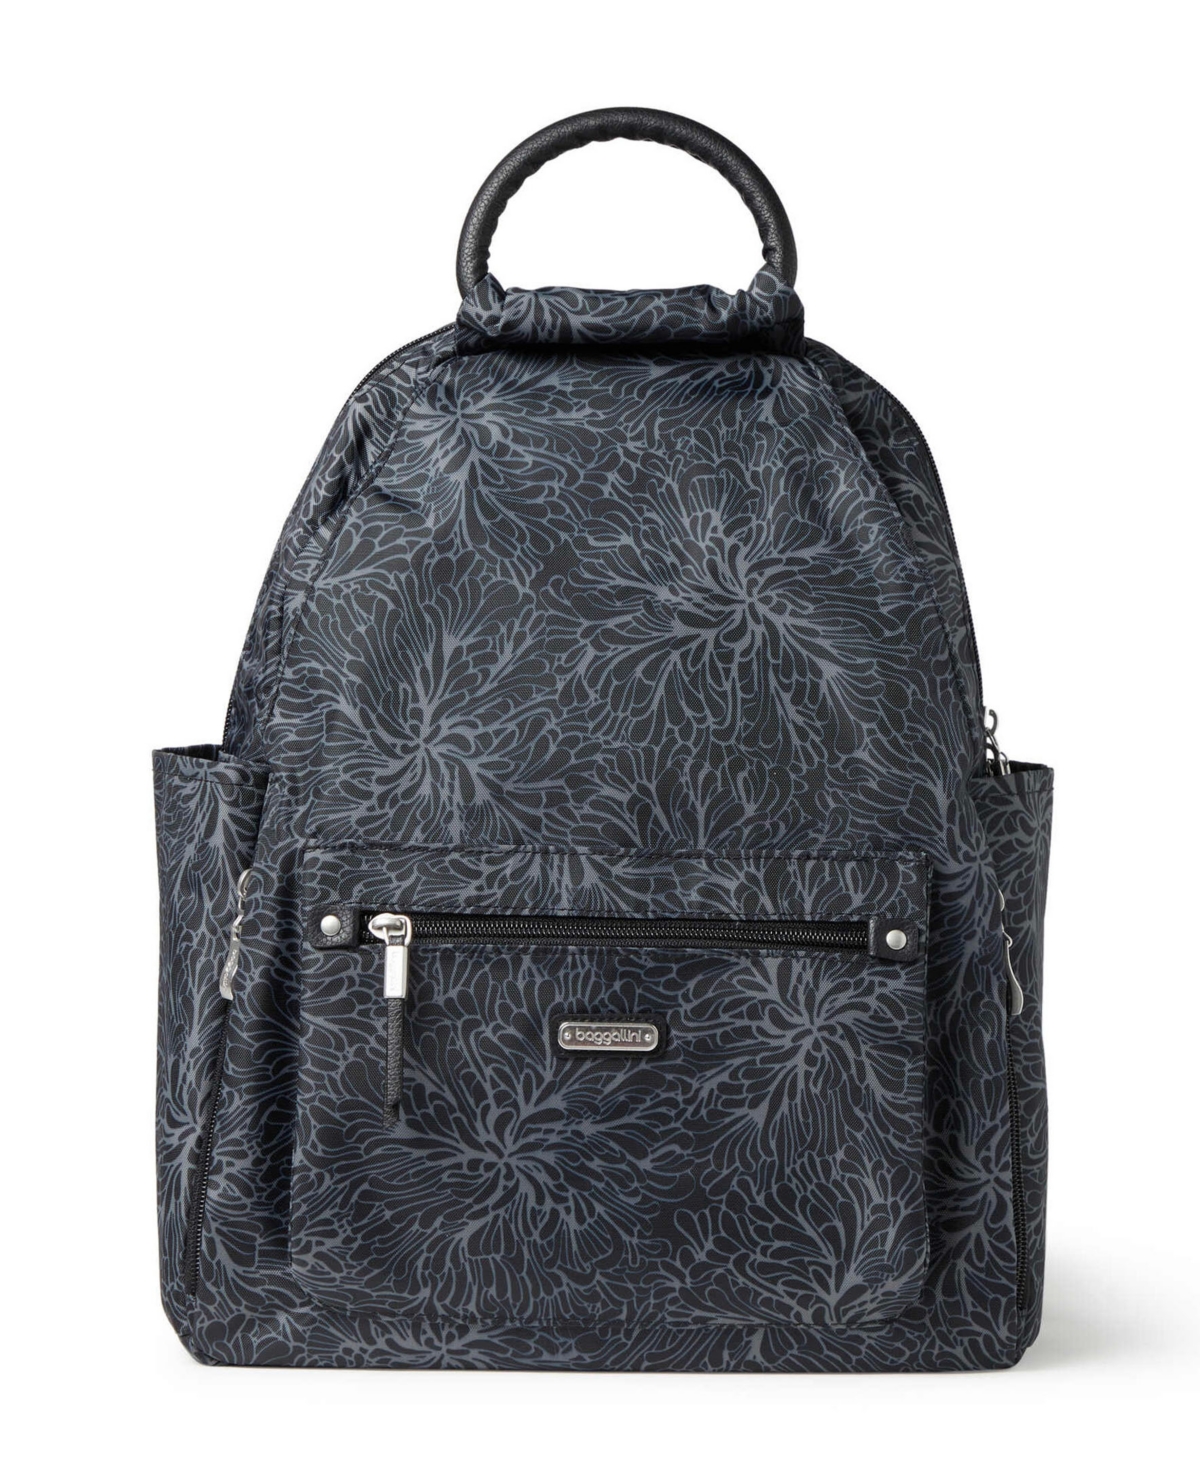 Baggallini All Day With Wristlet Backpack In Midnight Blossom